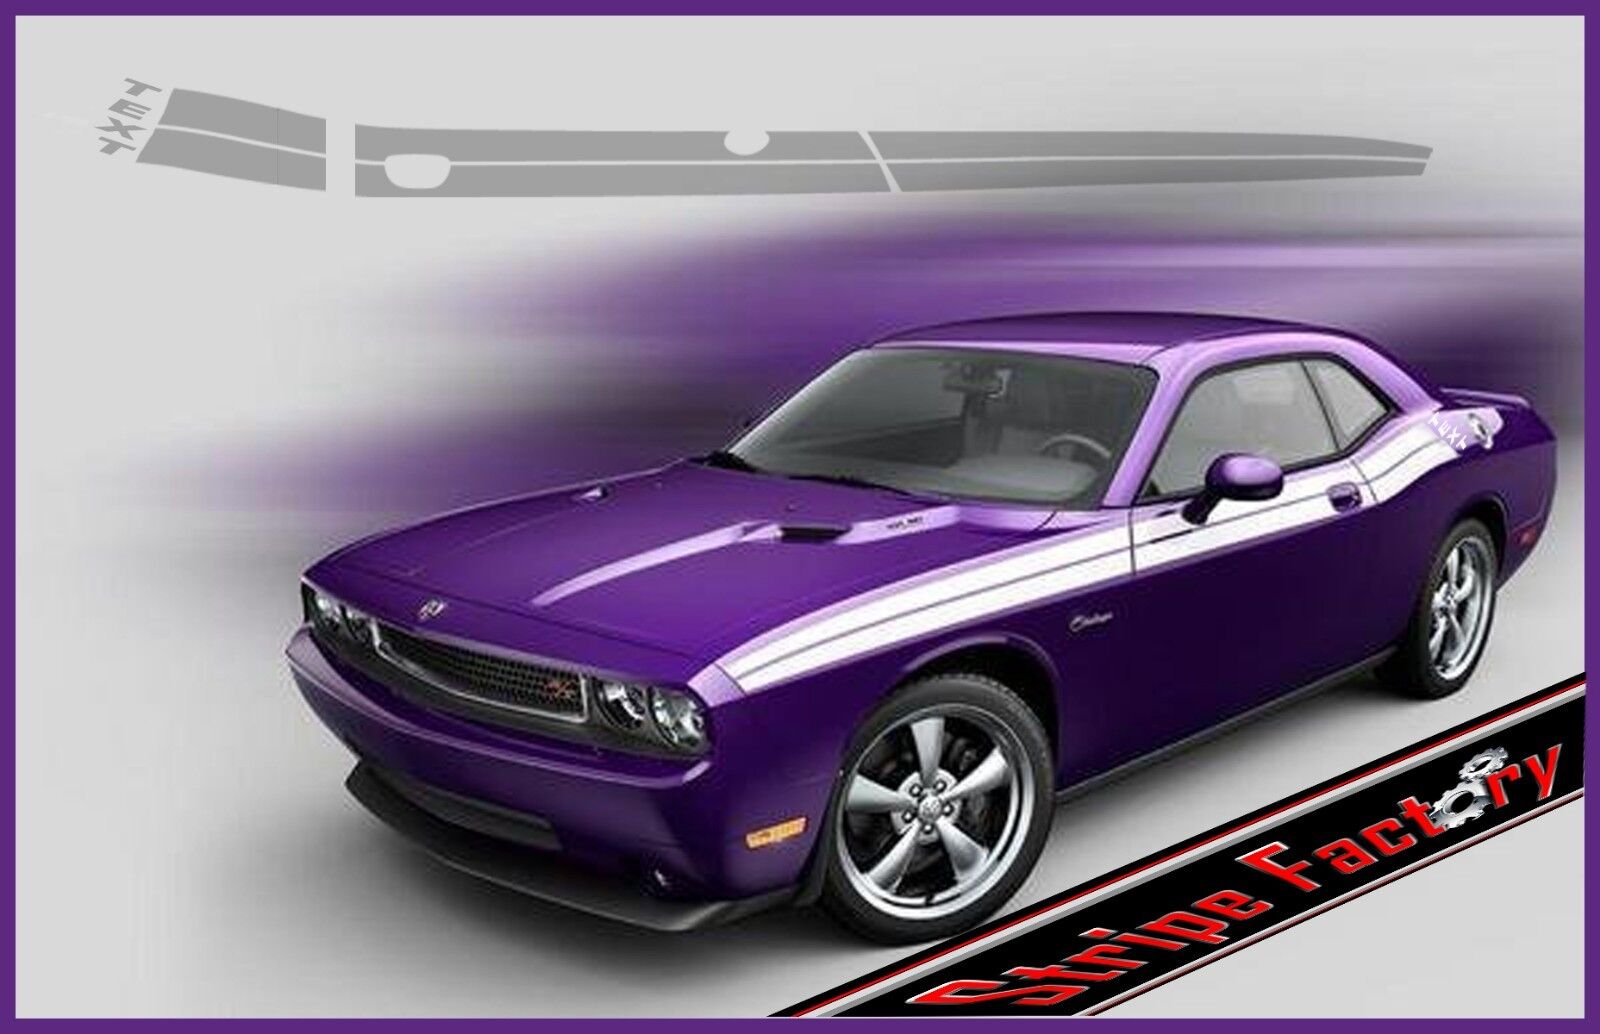 DODGE CHALLENGER TEXT FRONT ANGLE DUEL 2008-2010 FACTORY STRIPE DECAL GRAPHIC